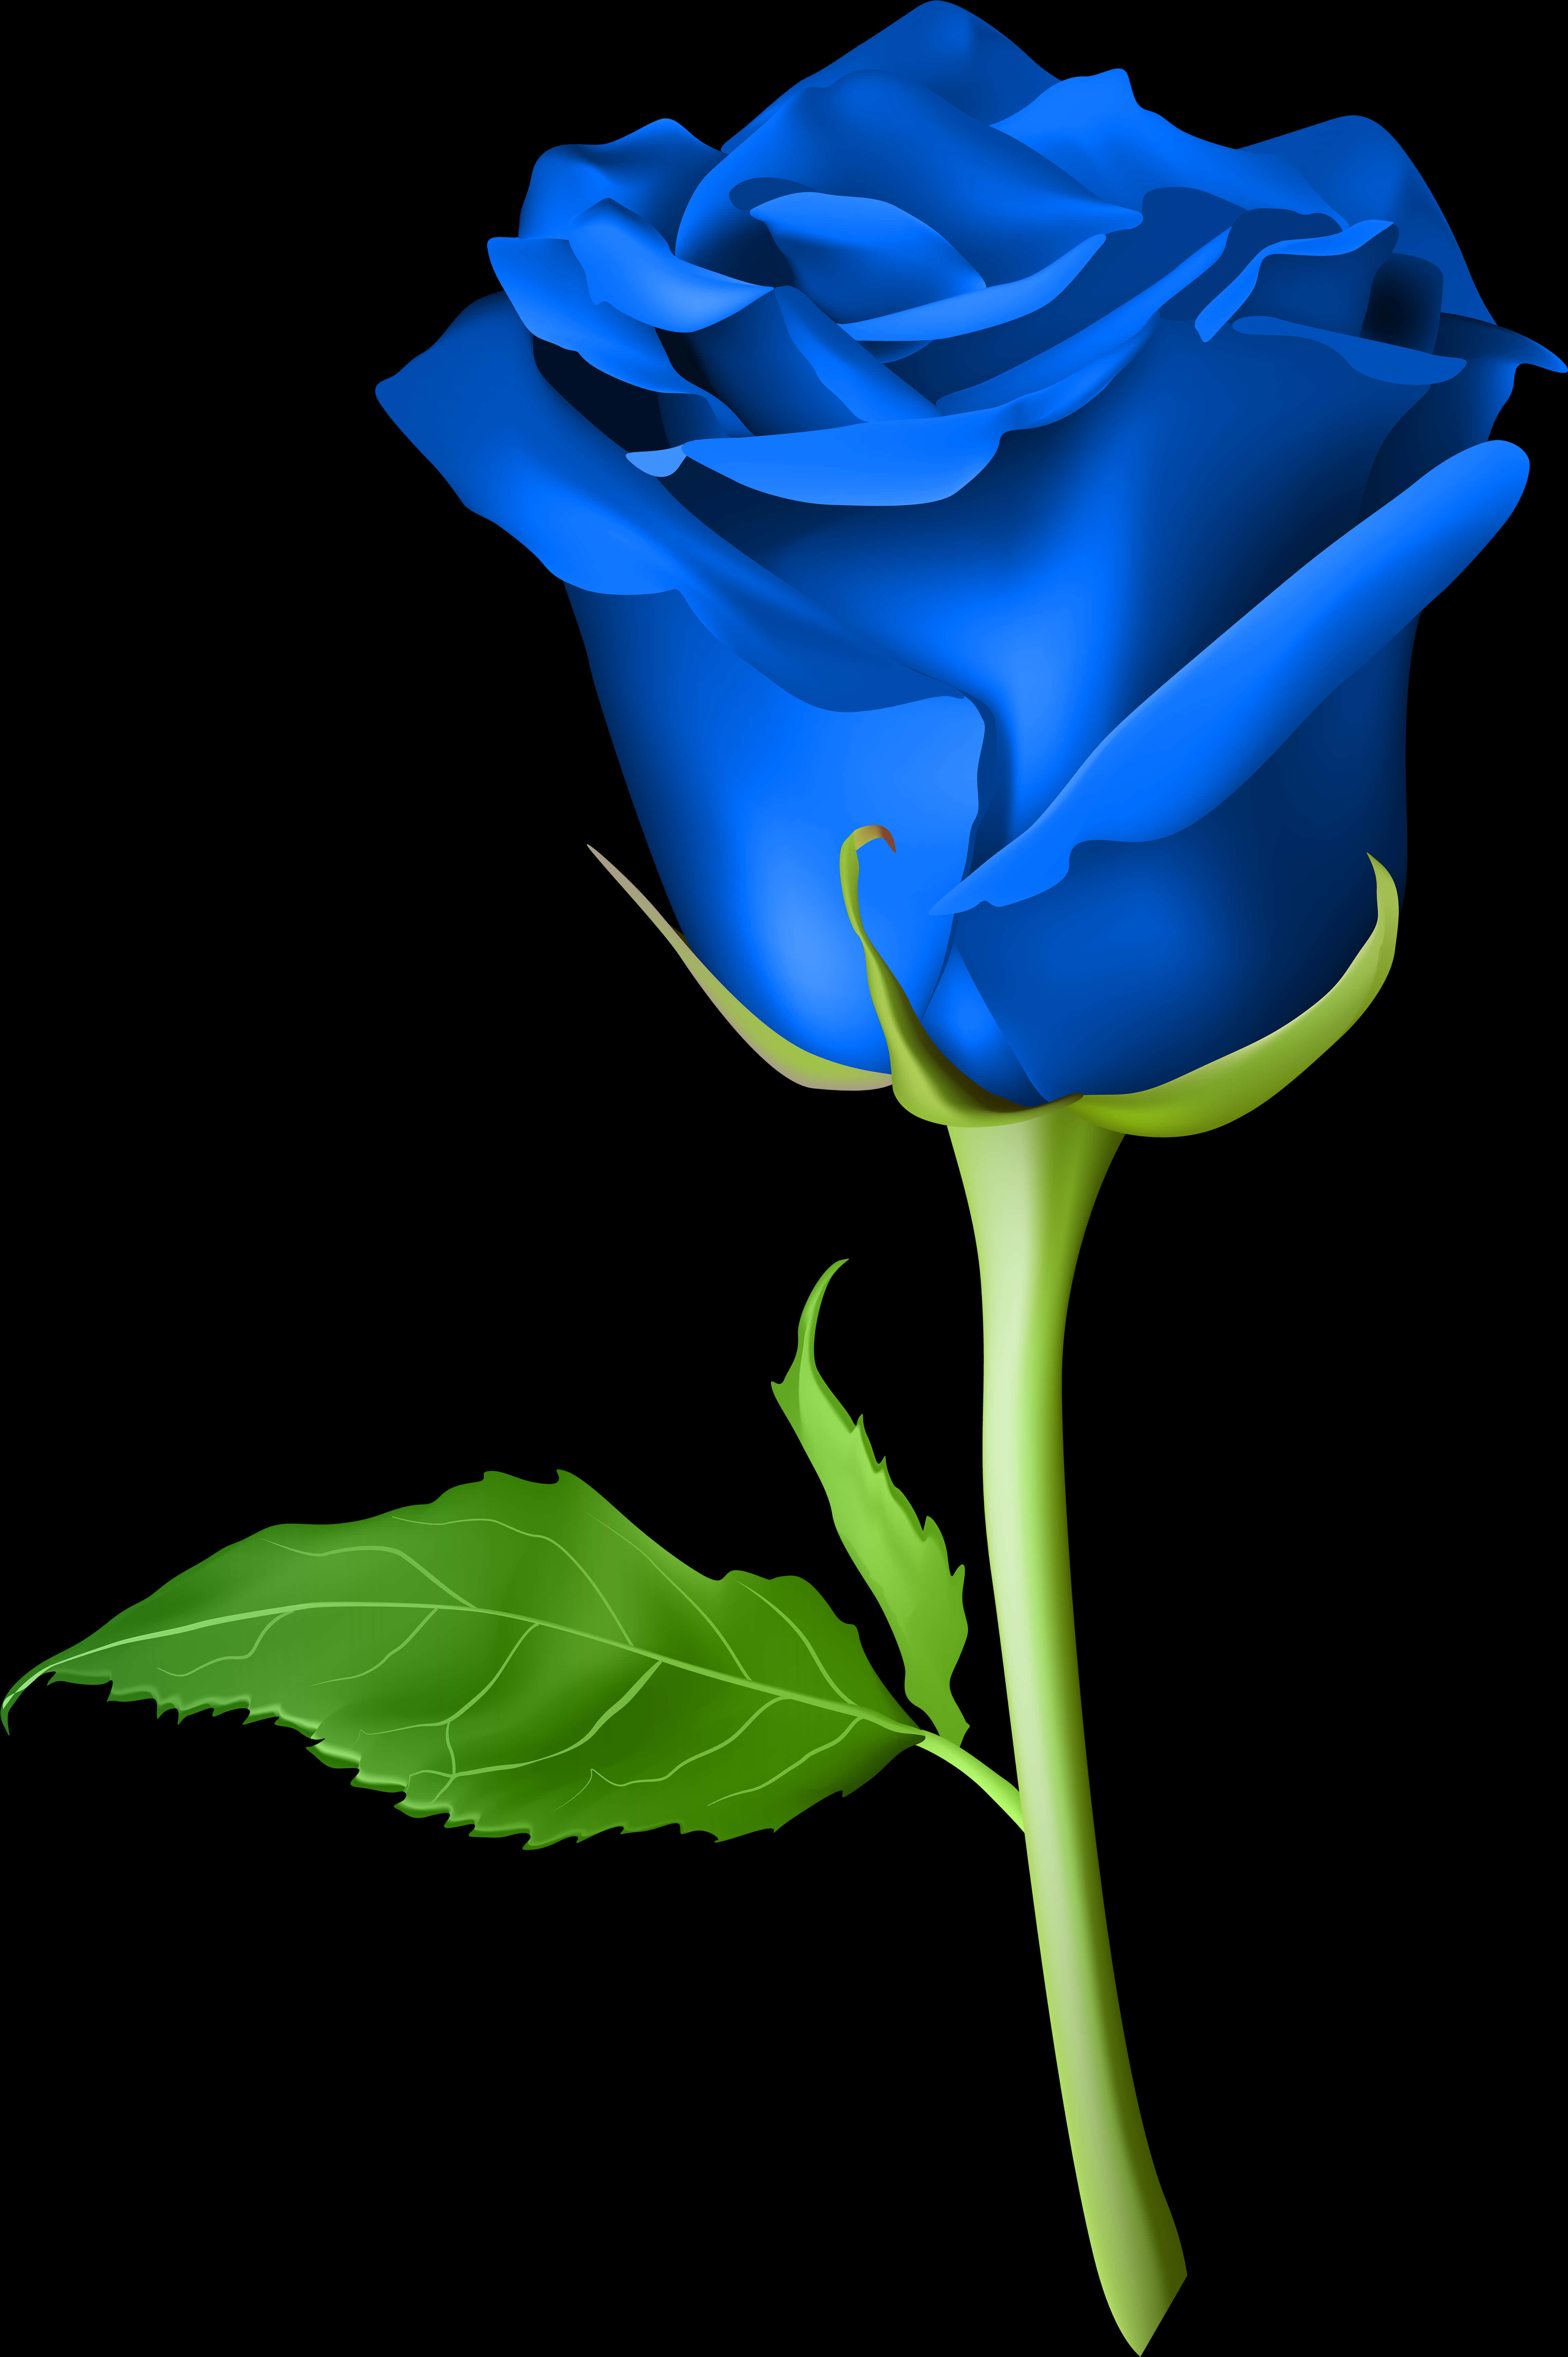 A Blue Rose With Green Leaves